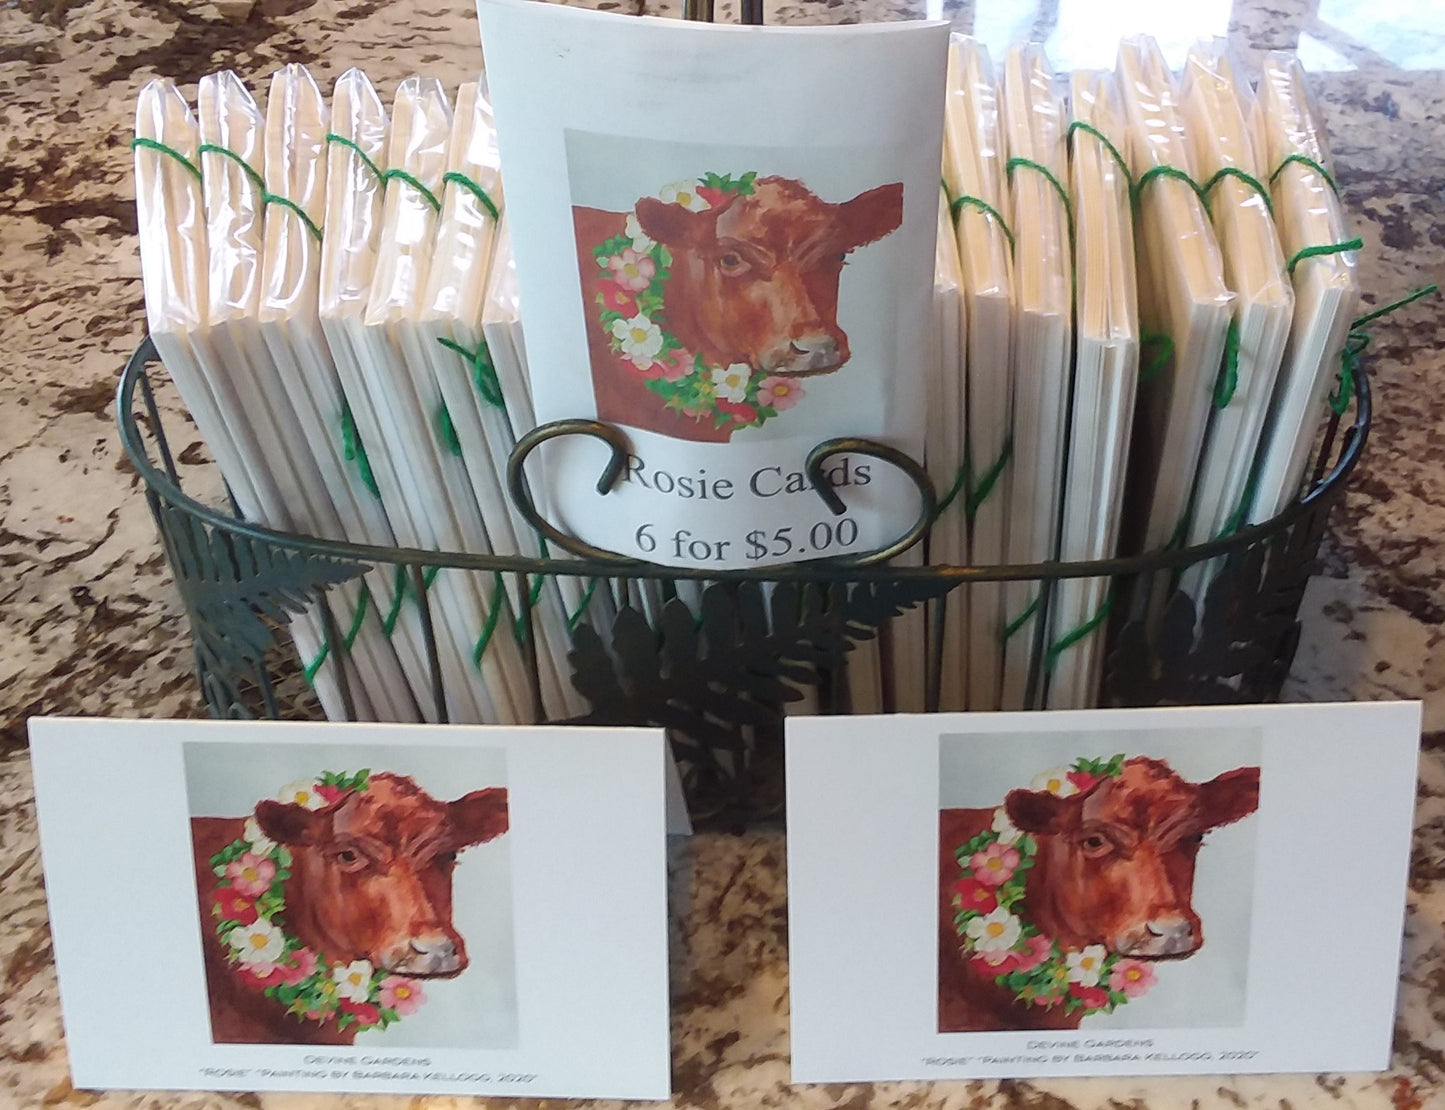 Display of Rosie the cow cards